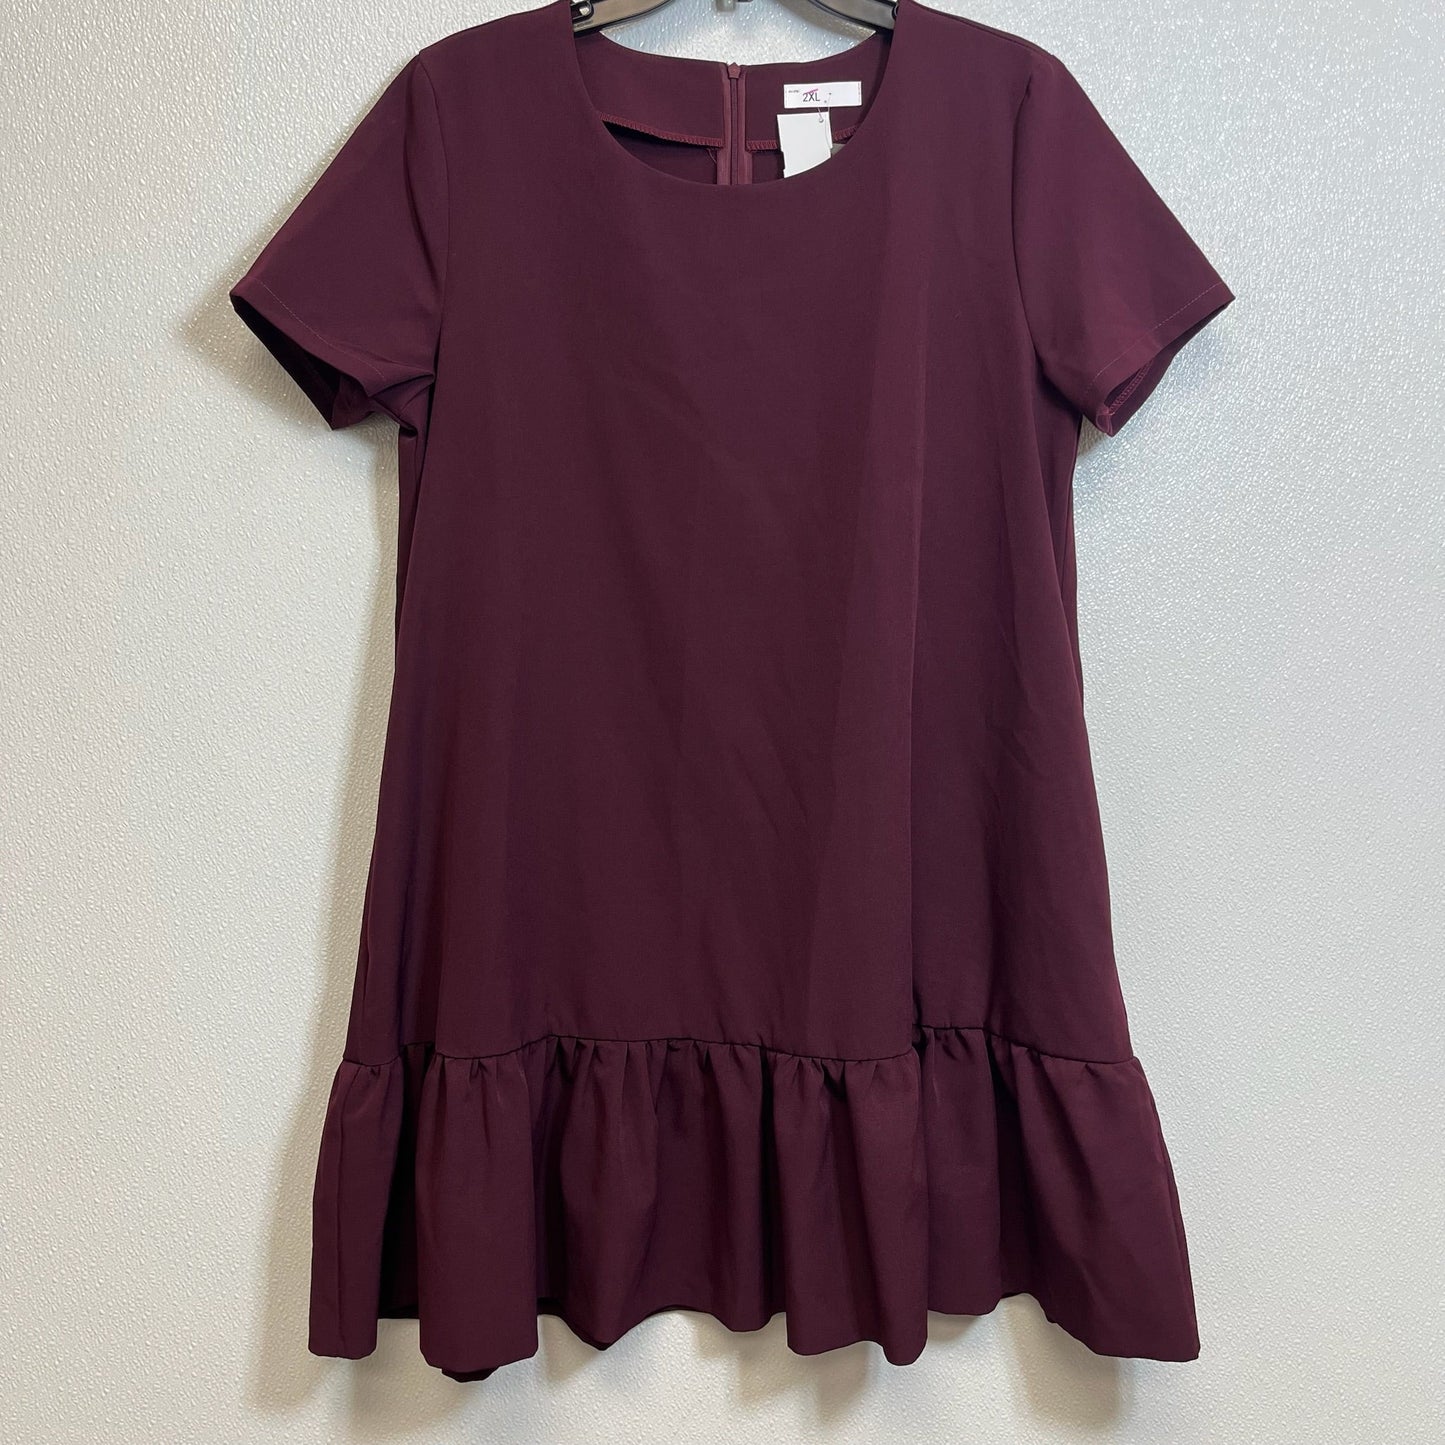 Burgundy Dress Casual Short Clothes Mentor, Size 2x